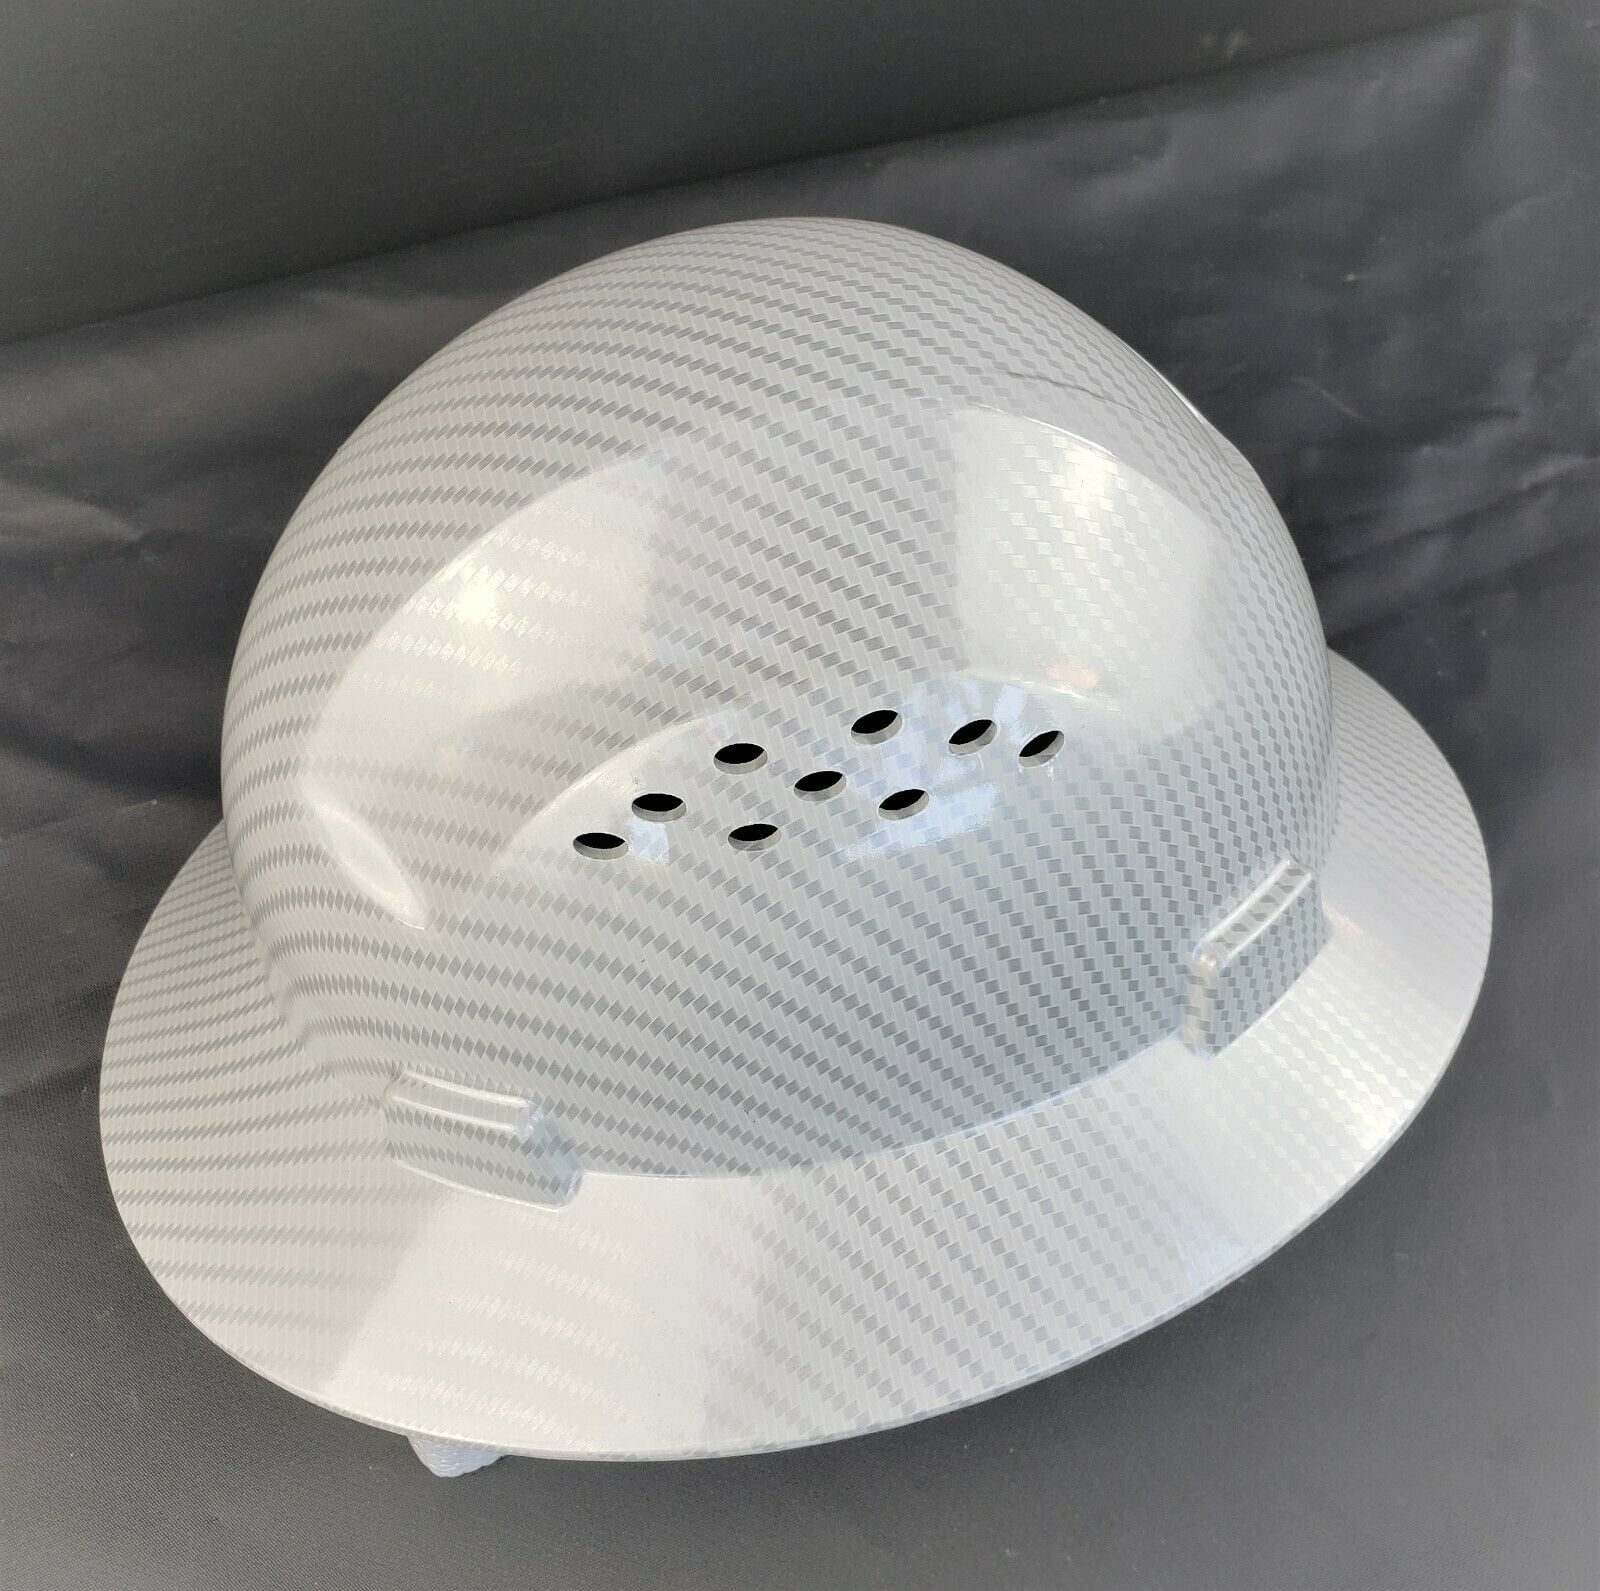 HDPE-Hydro-Dipped-Black-Full-Brim-Hard-Hat-with-Fas-trac-Suspension  HDPE-Hydro 